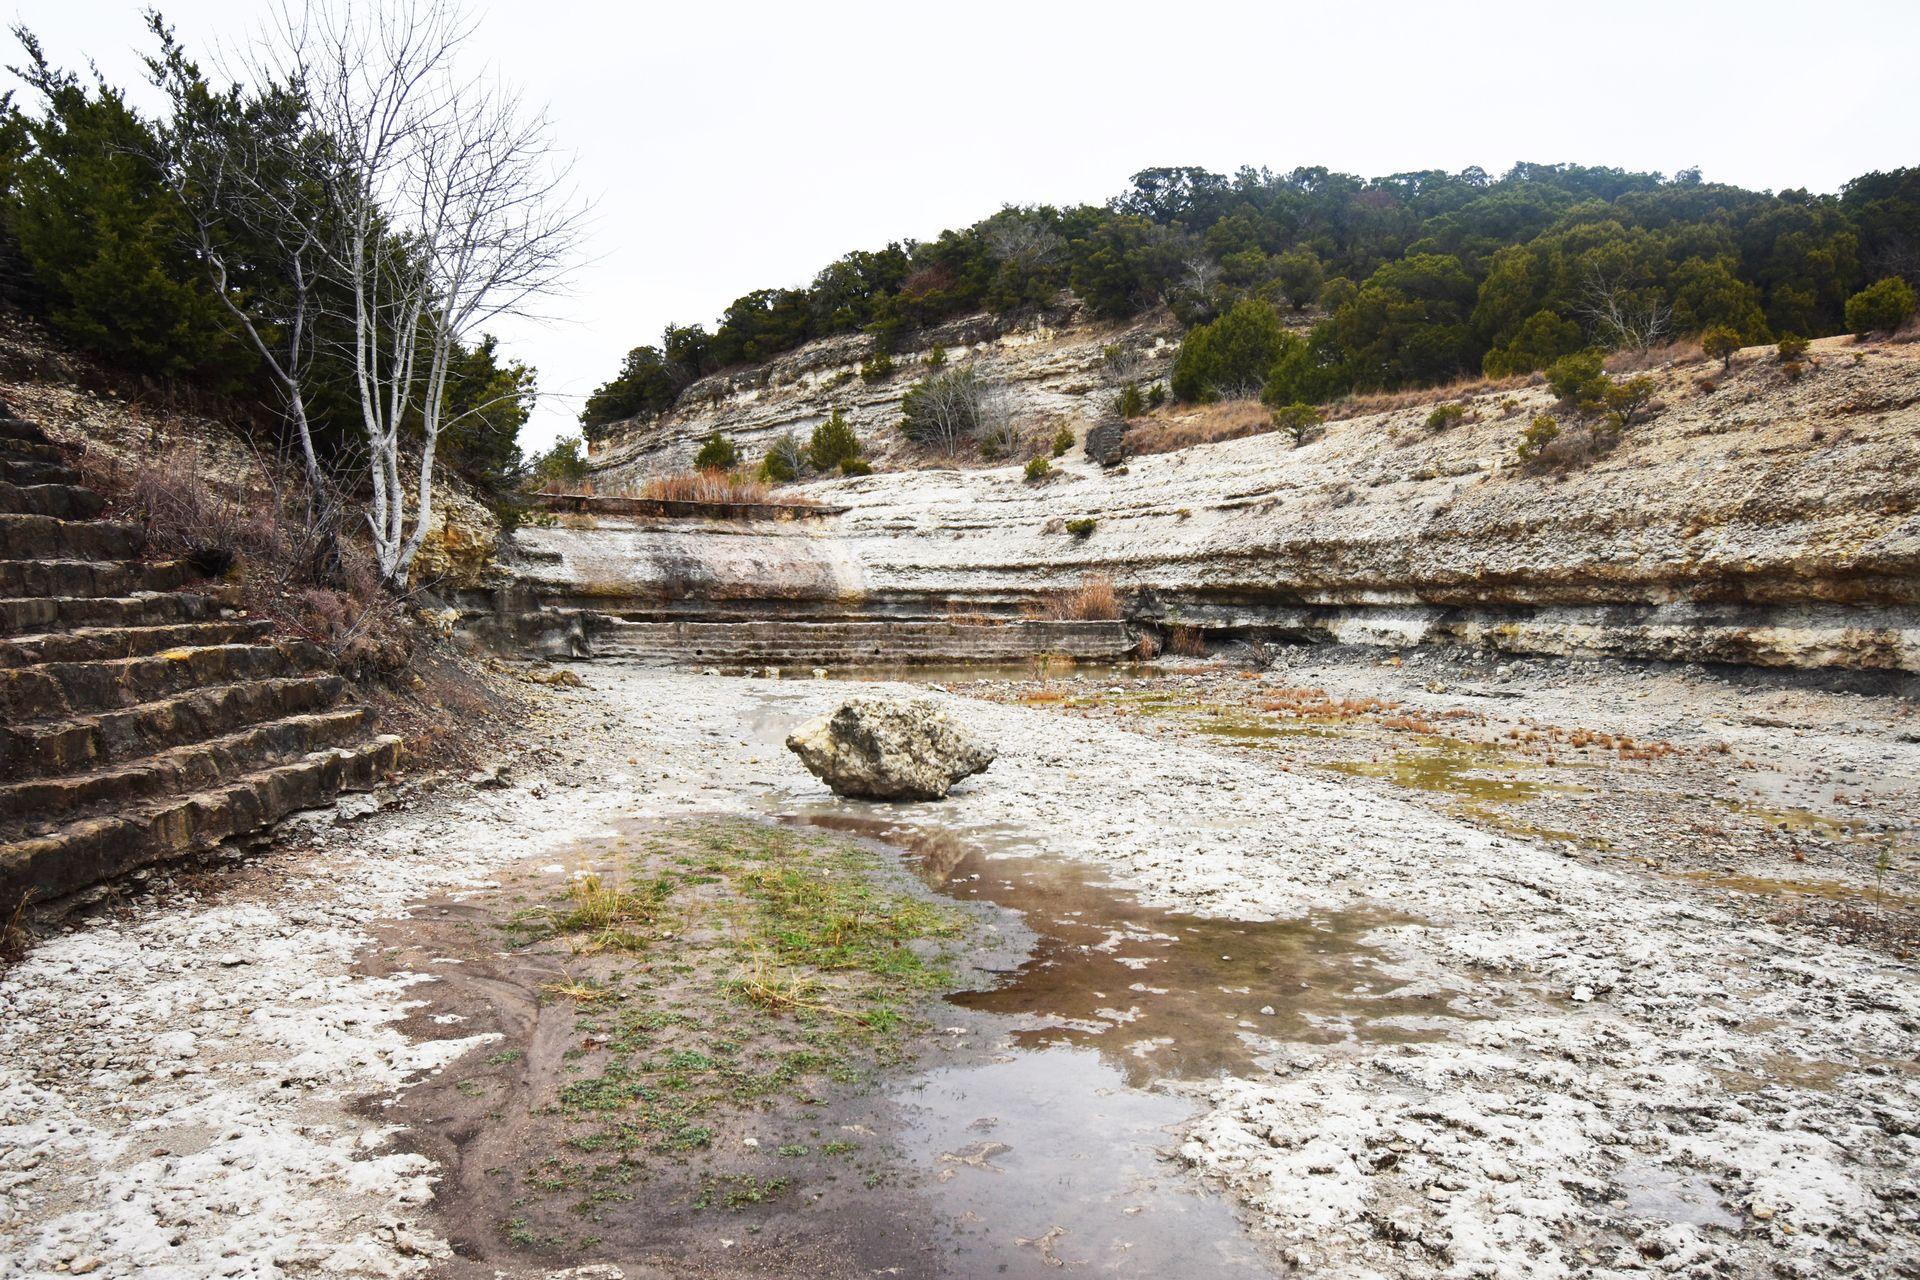 A large spillway area with a boulder in Cleburne State Park.